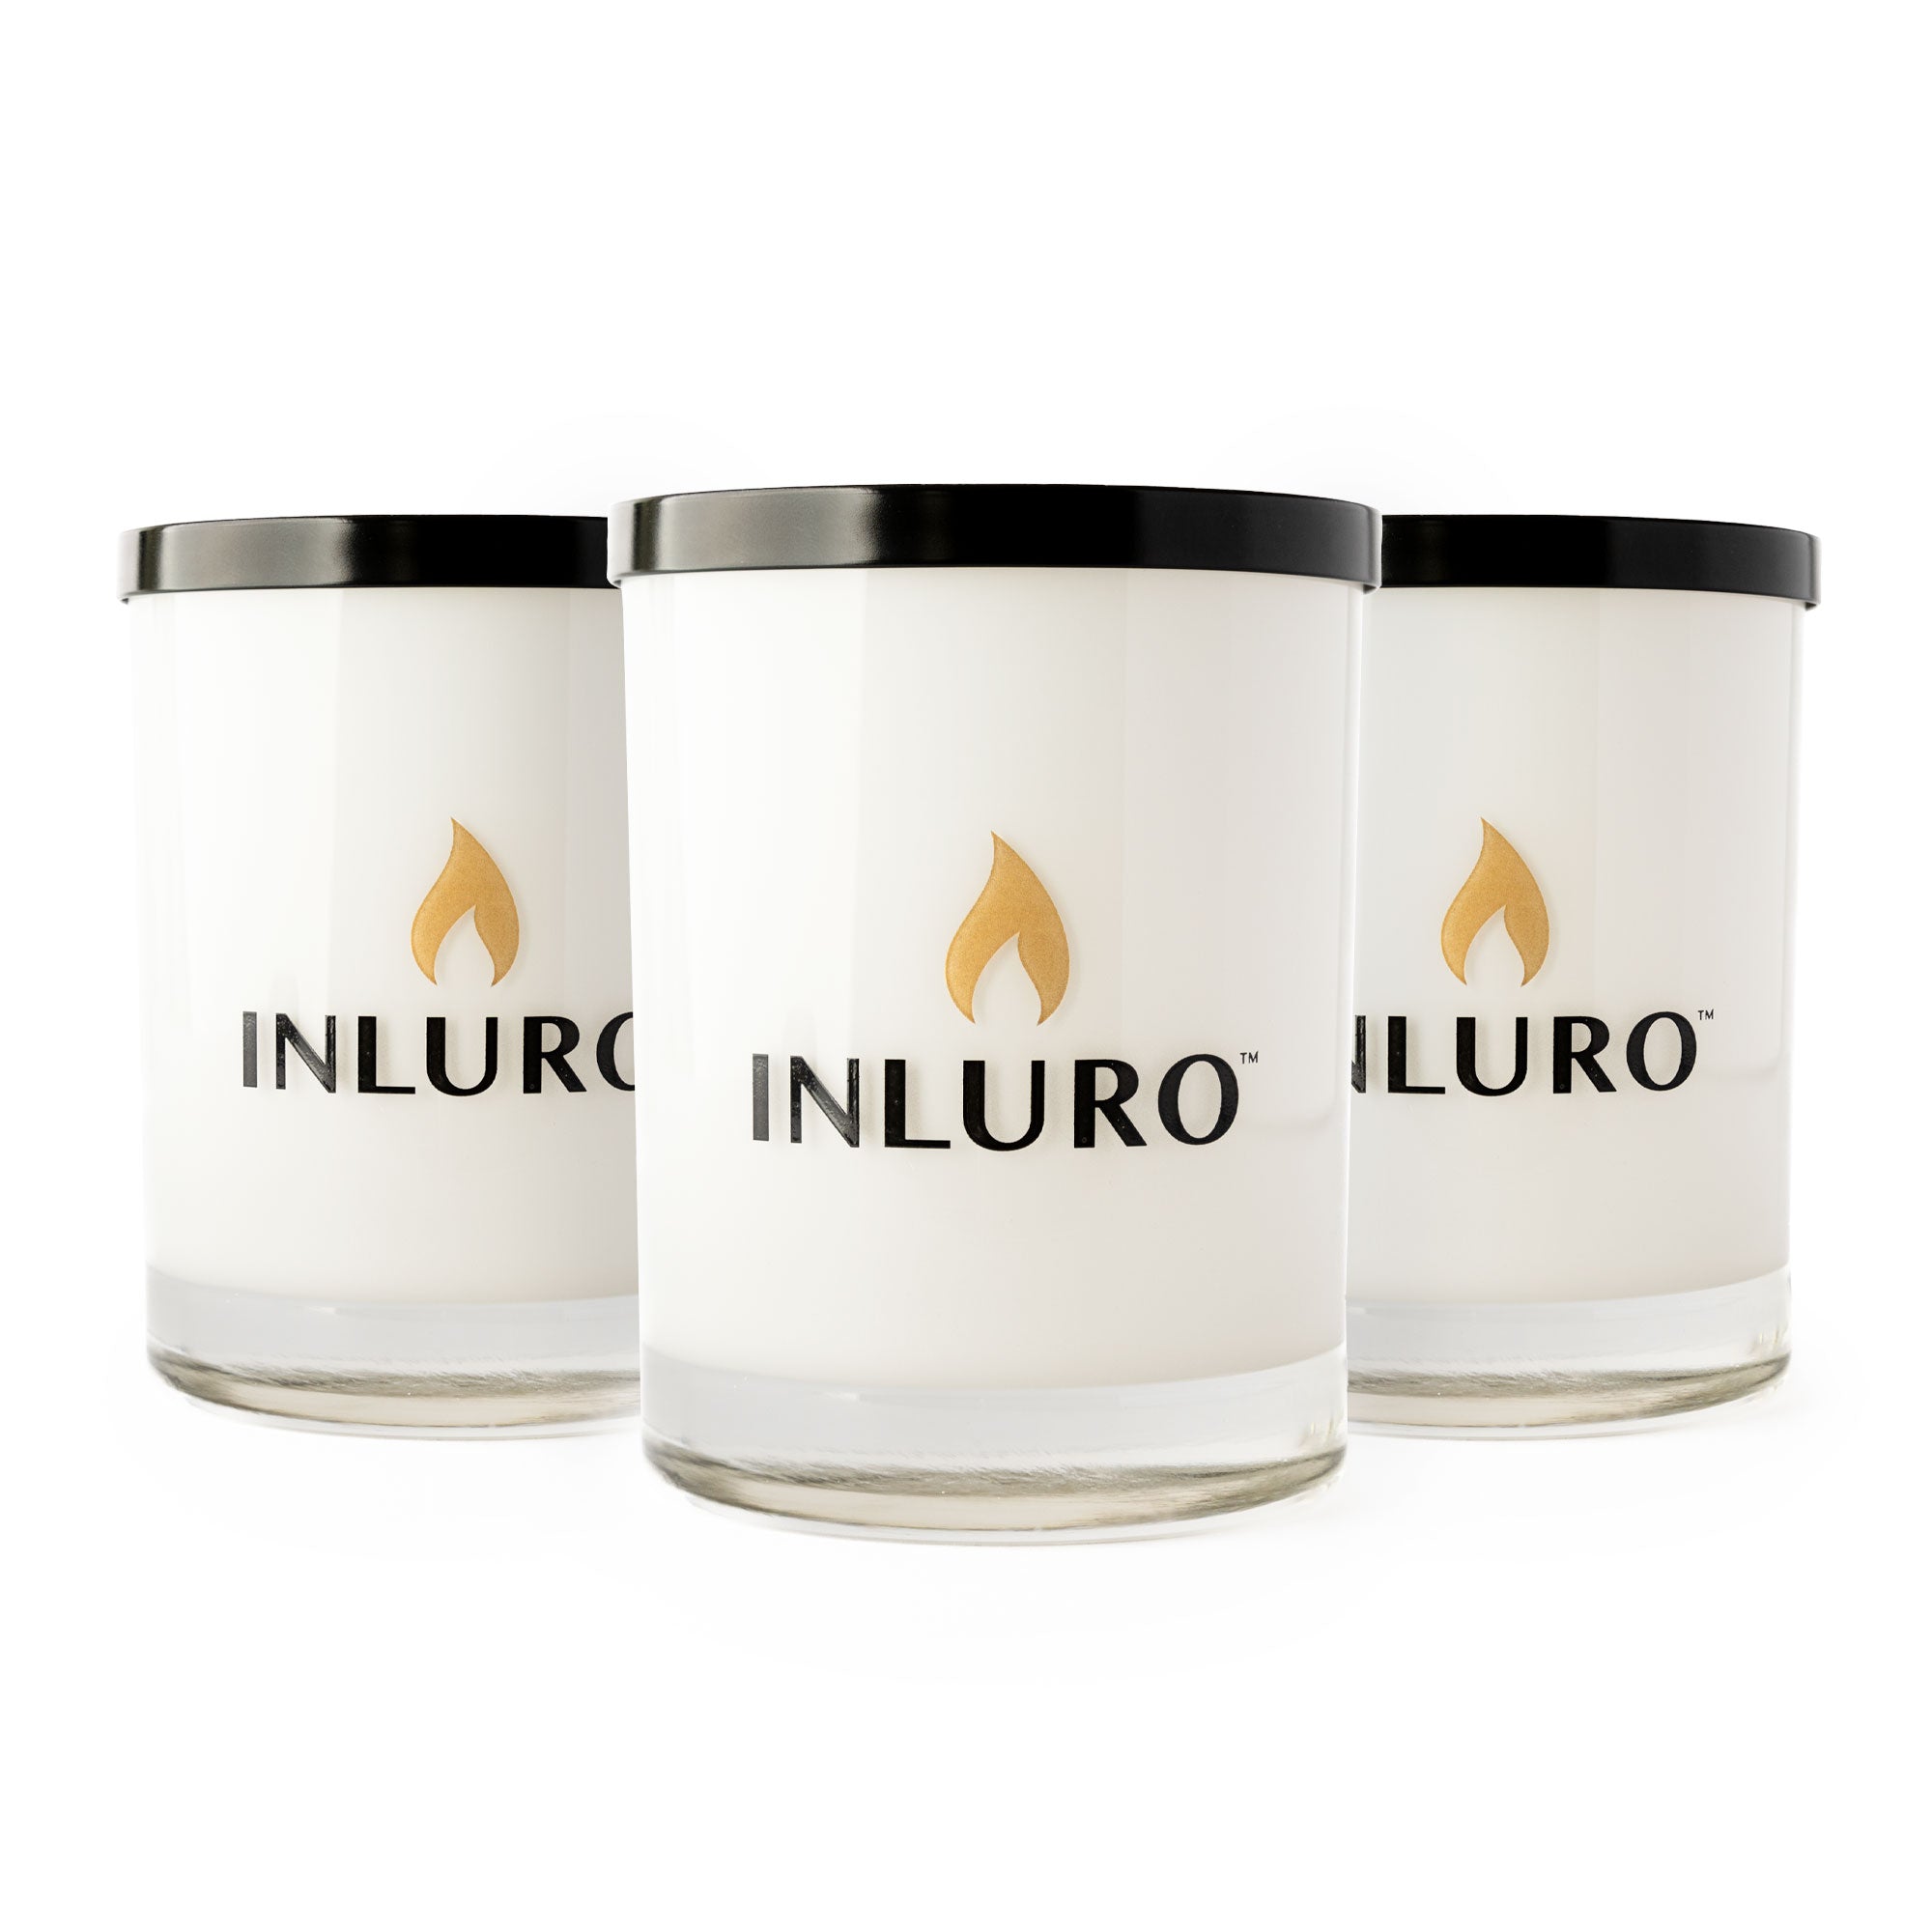 ipuro - Decorative ipuro Cuir Noble Scented Candle - Minimalist & Puristic  Scented Candles in Glass - Intense Scented Candles with Aromatic & Dark